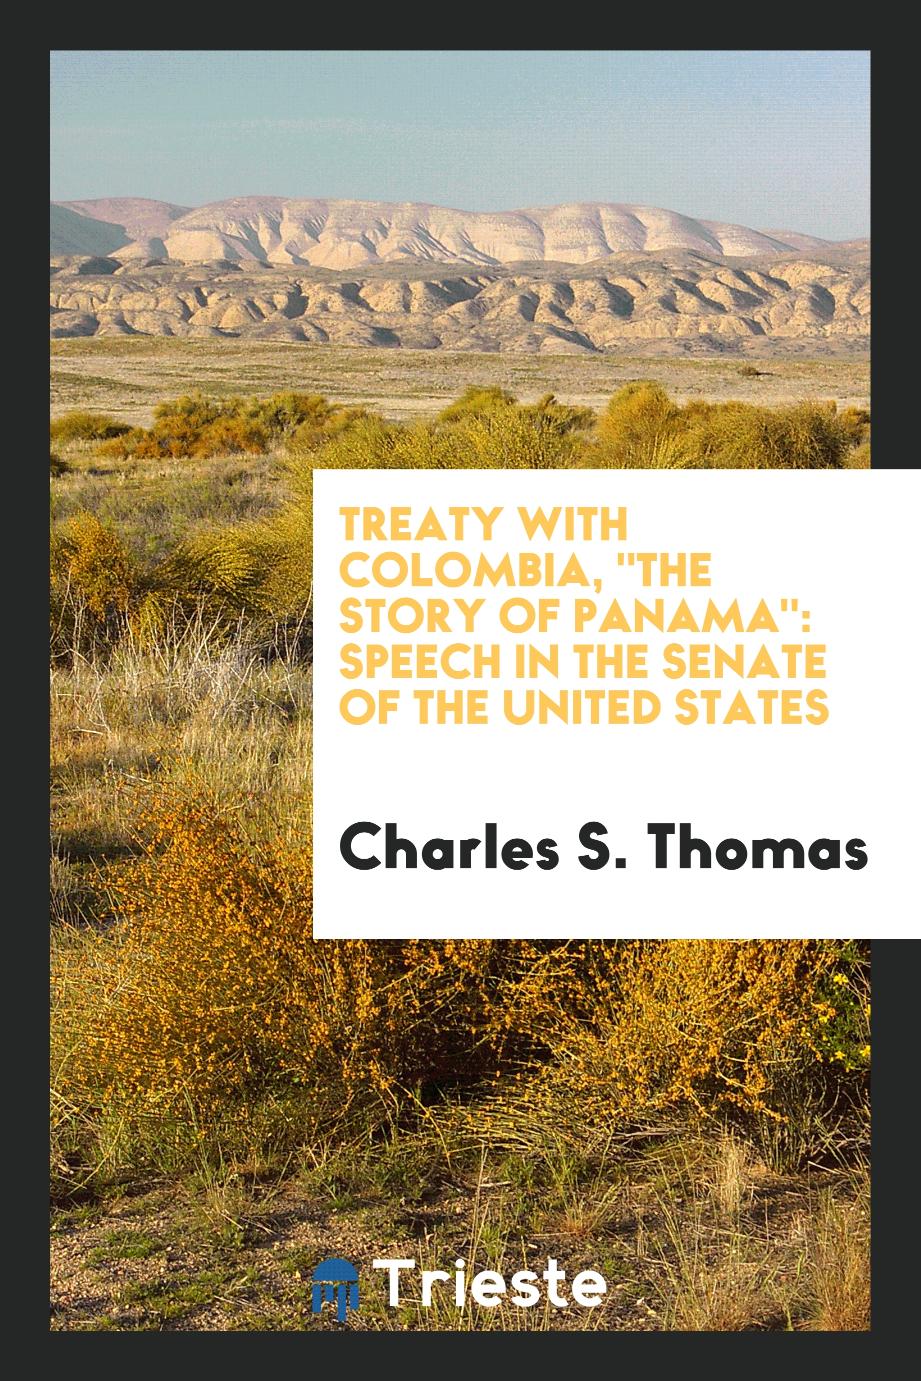 Treaty with Colombia, "The story of Panama": speech in the Senate of the United States